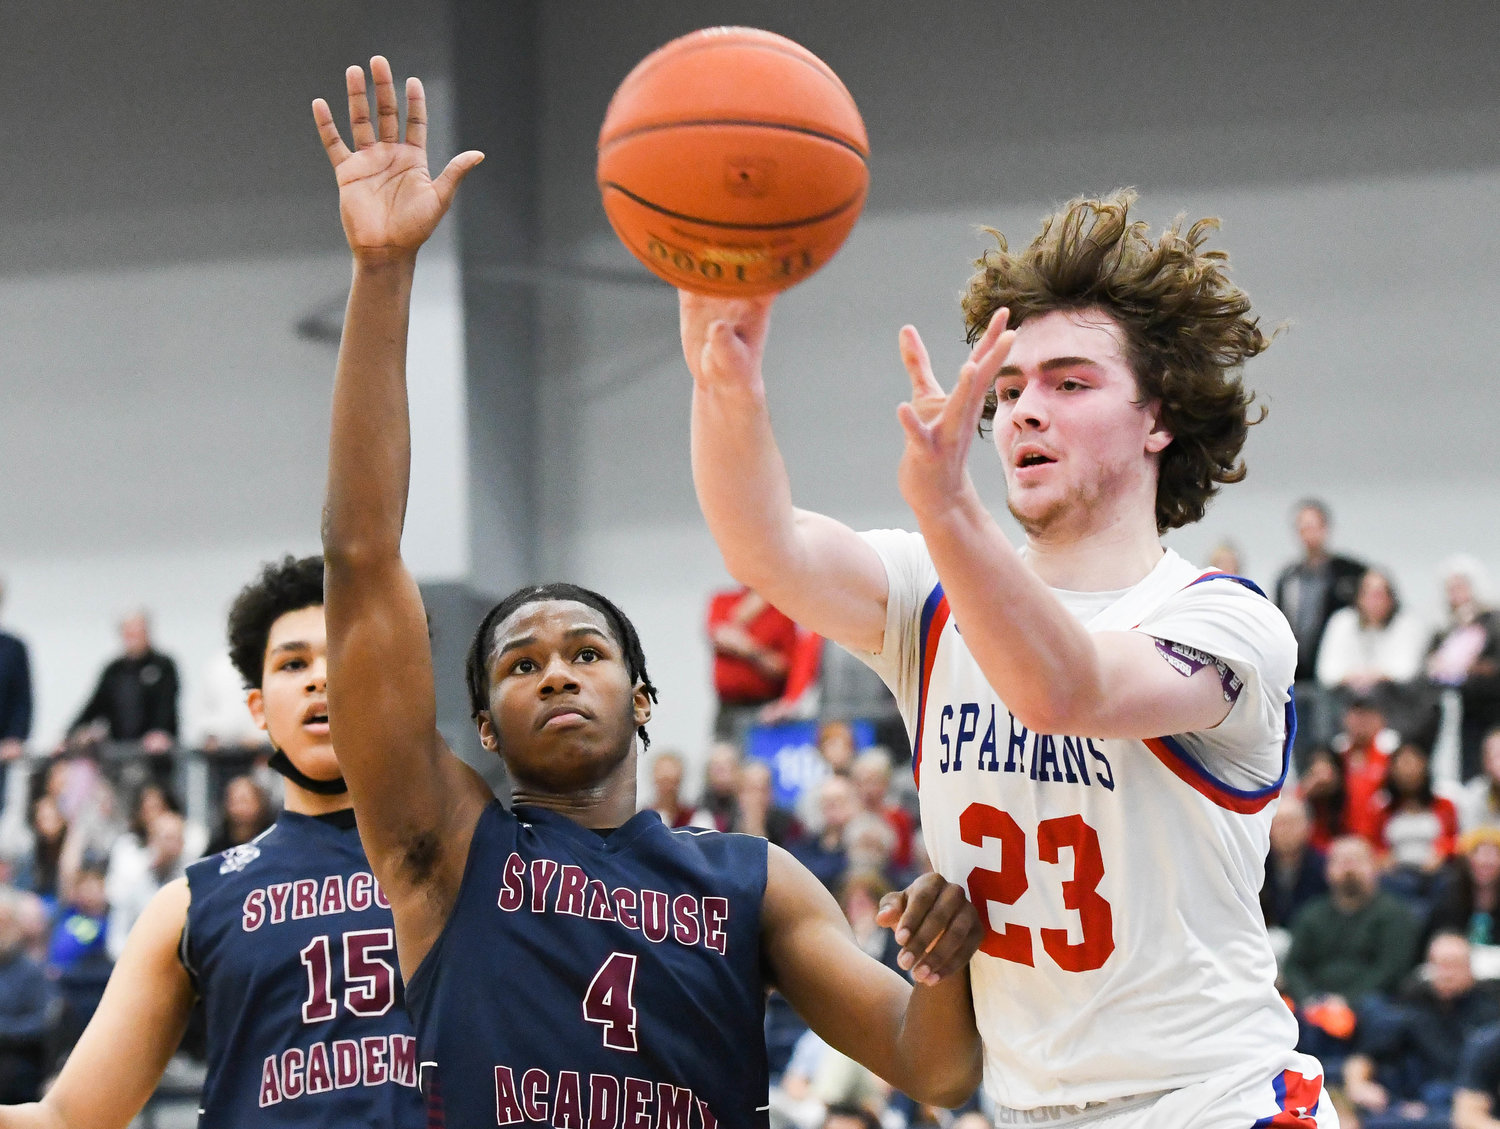 MAKING A PLAY -- New Hartford junior Zach Philipkoski (23) passes the ball to a teammate during the Section III Class A final against Syracuse Academy of Science on Sunday at SRC Arena. Philipkoski finished with 32 points to lead New Hartford.